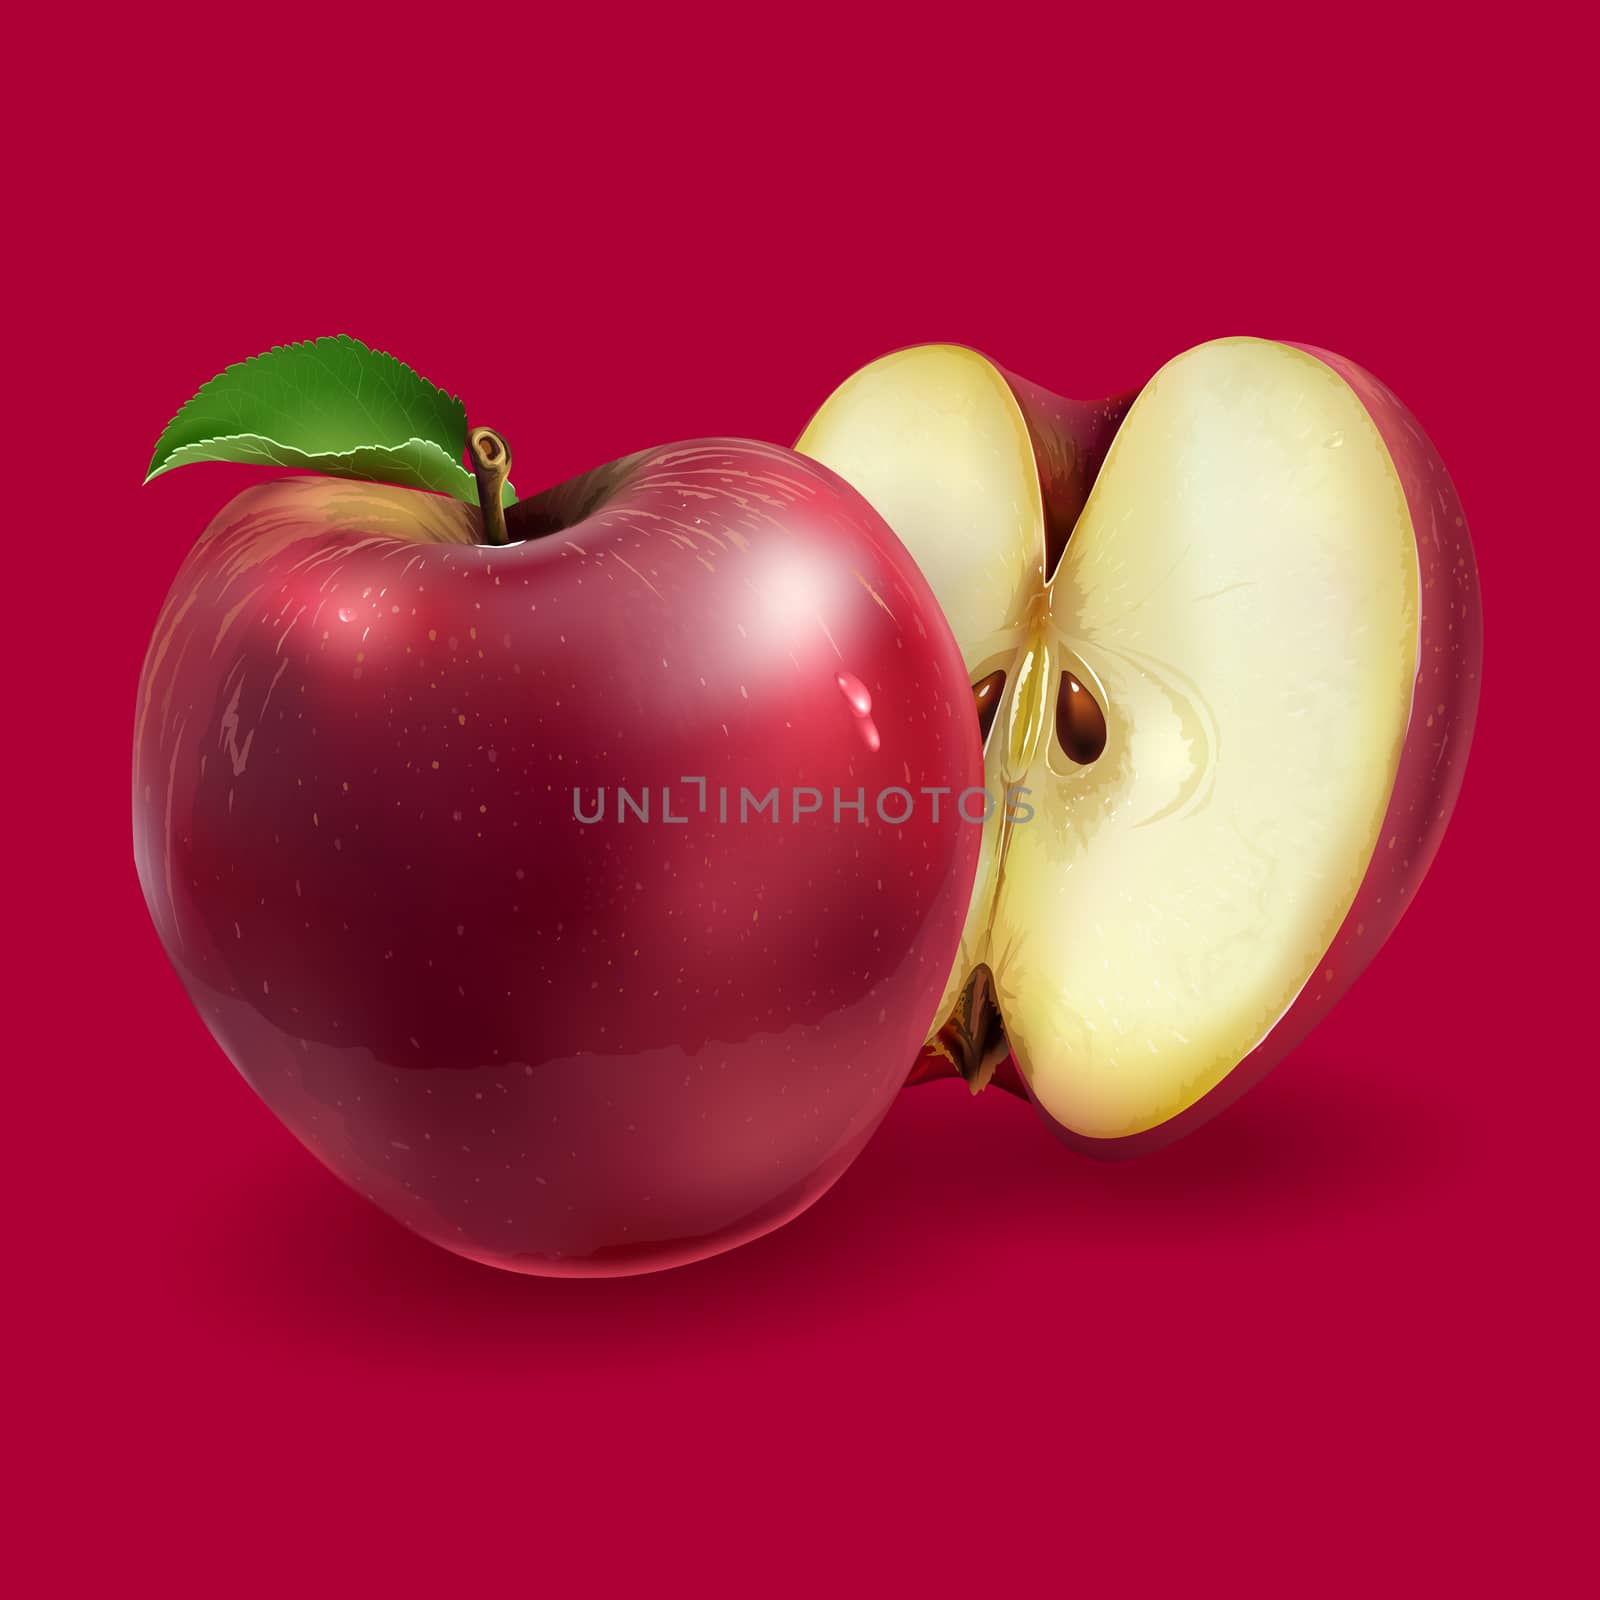 Realistic red apples on a red background.